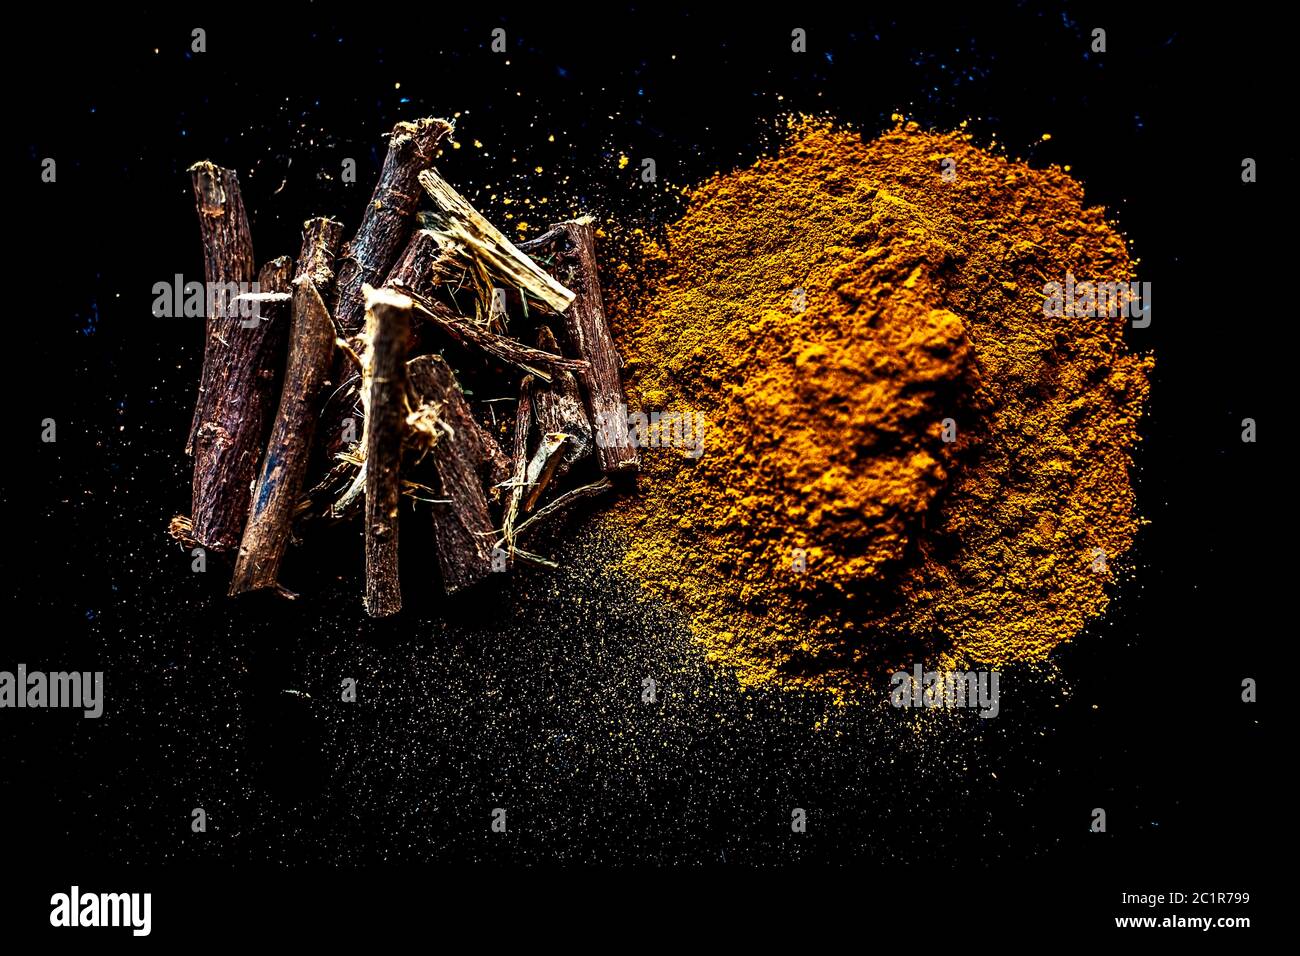 Shot of raw revand chini powder along with its raw root on a wooden surface. Shot in dark gothic colors. Stock Photo